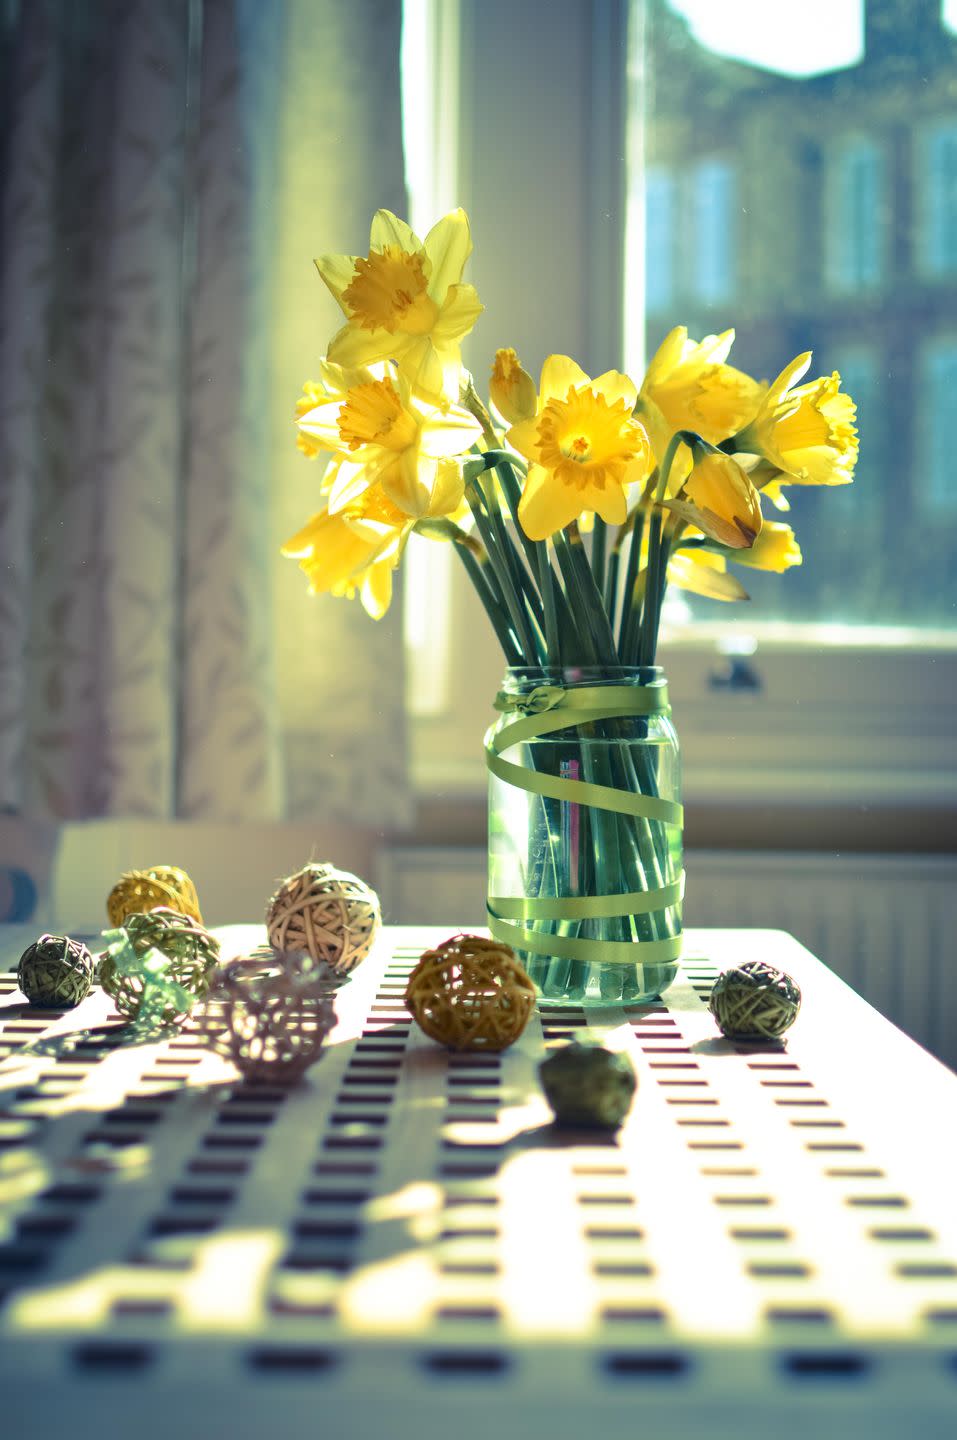 <p>Daffodils are the celebration of a decade of marriage. It's a reminder of memories shared and the many exciting years still ahead. </p>